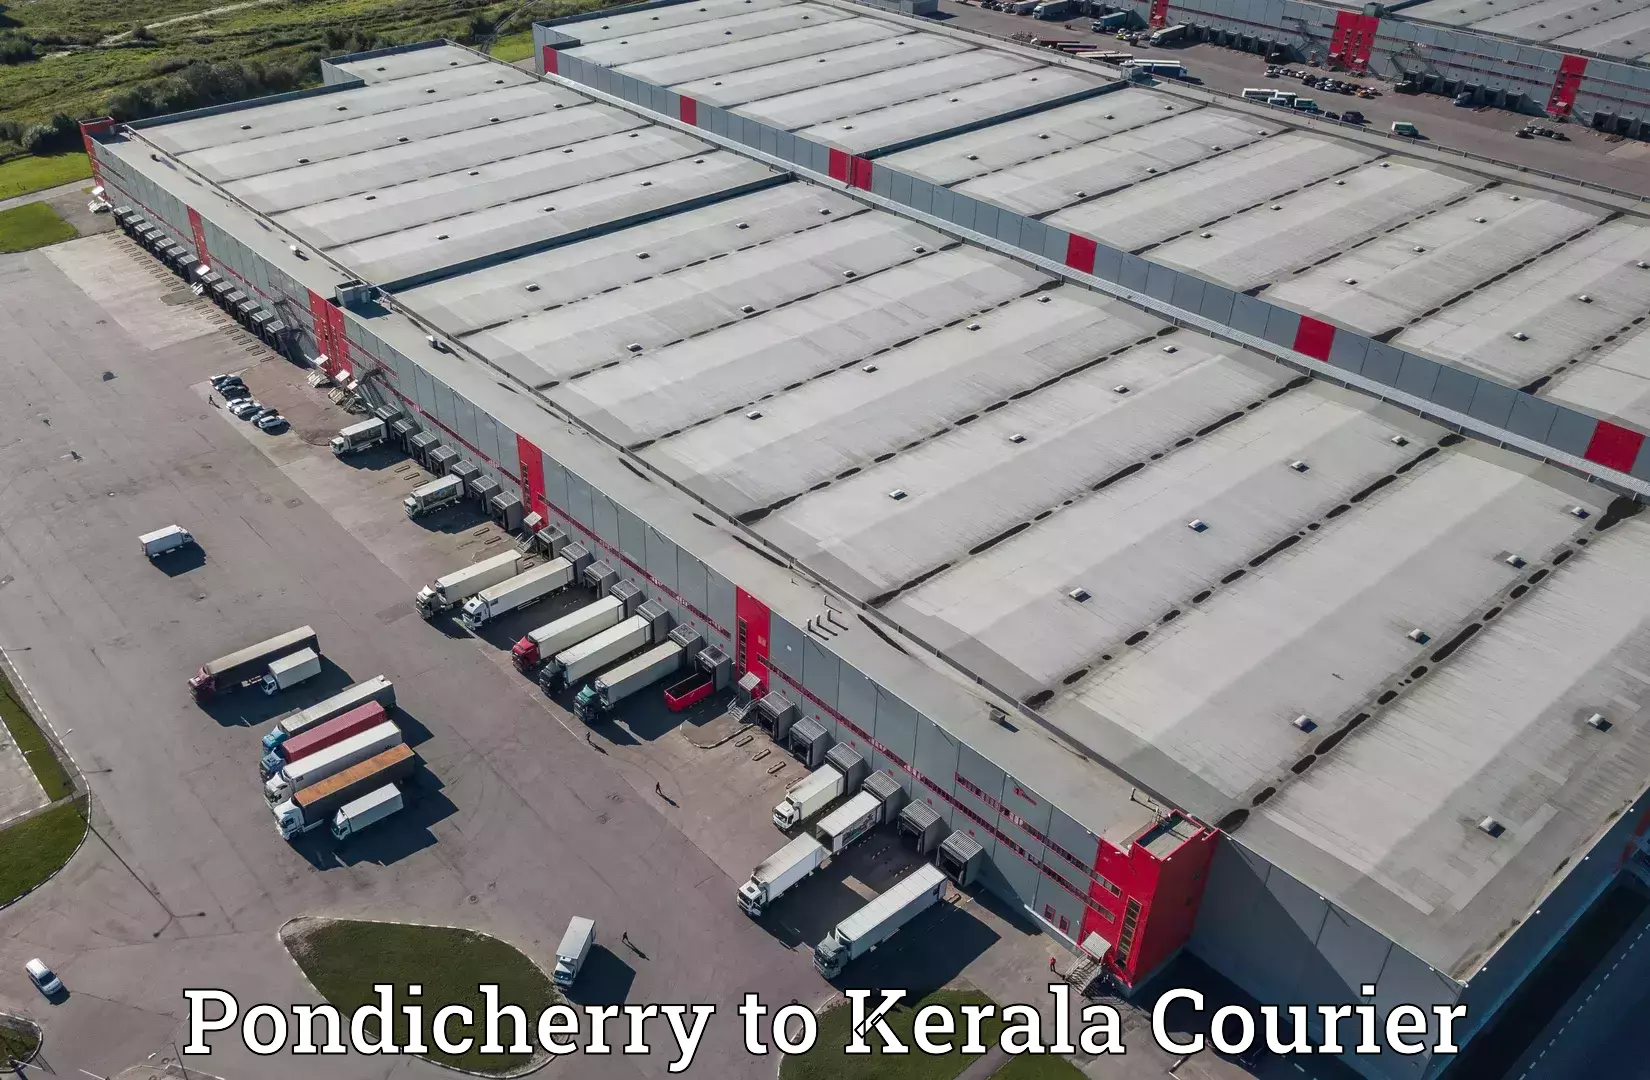 Efficient shipping operations in Pondicherry to Cochin Port Kochi